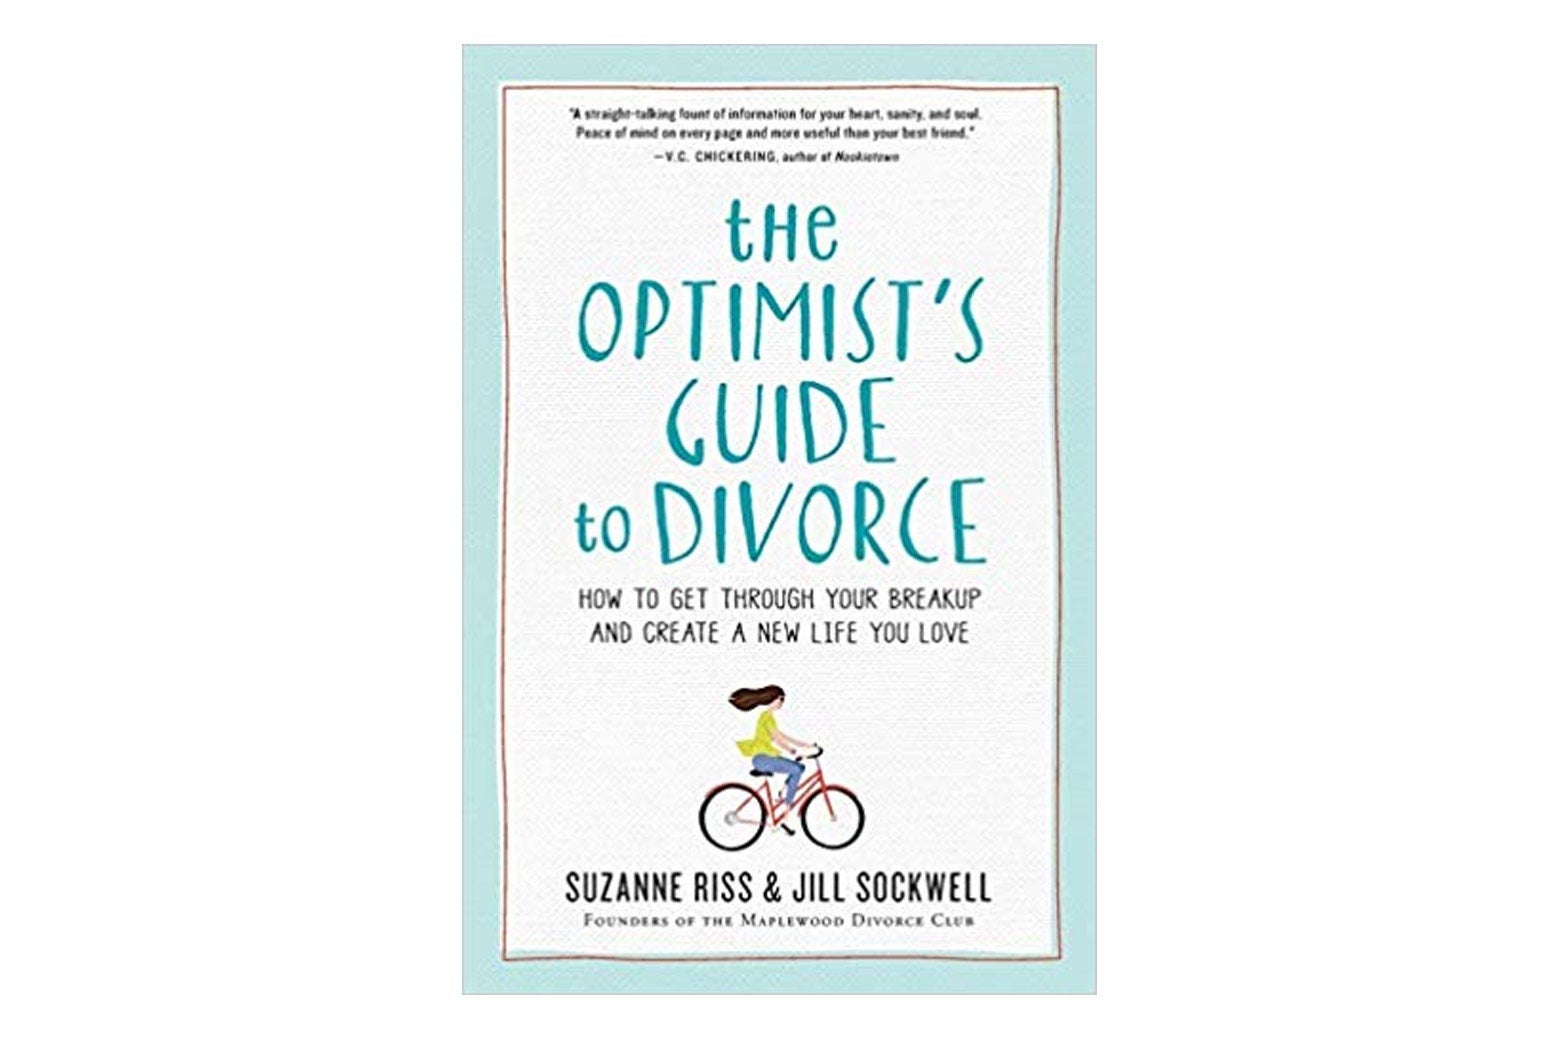 The Optimist's Guide to Divorce book cover